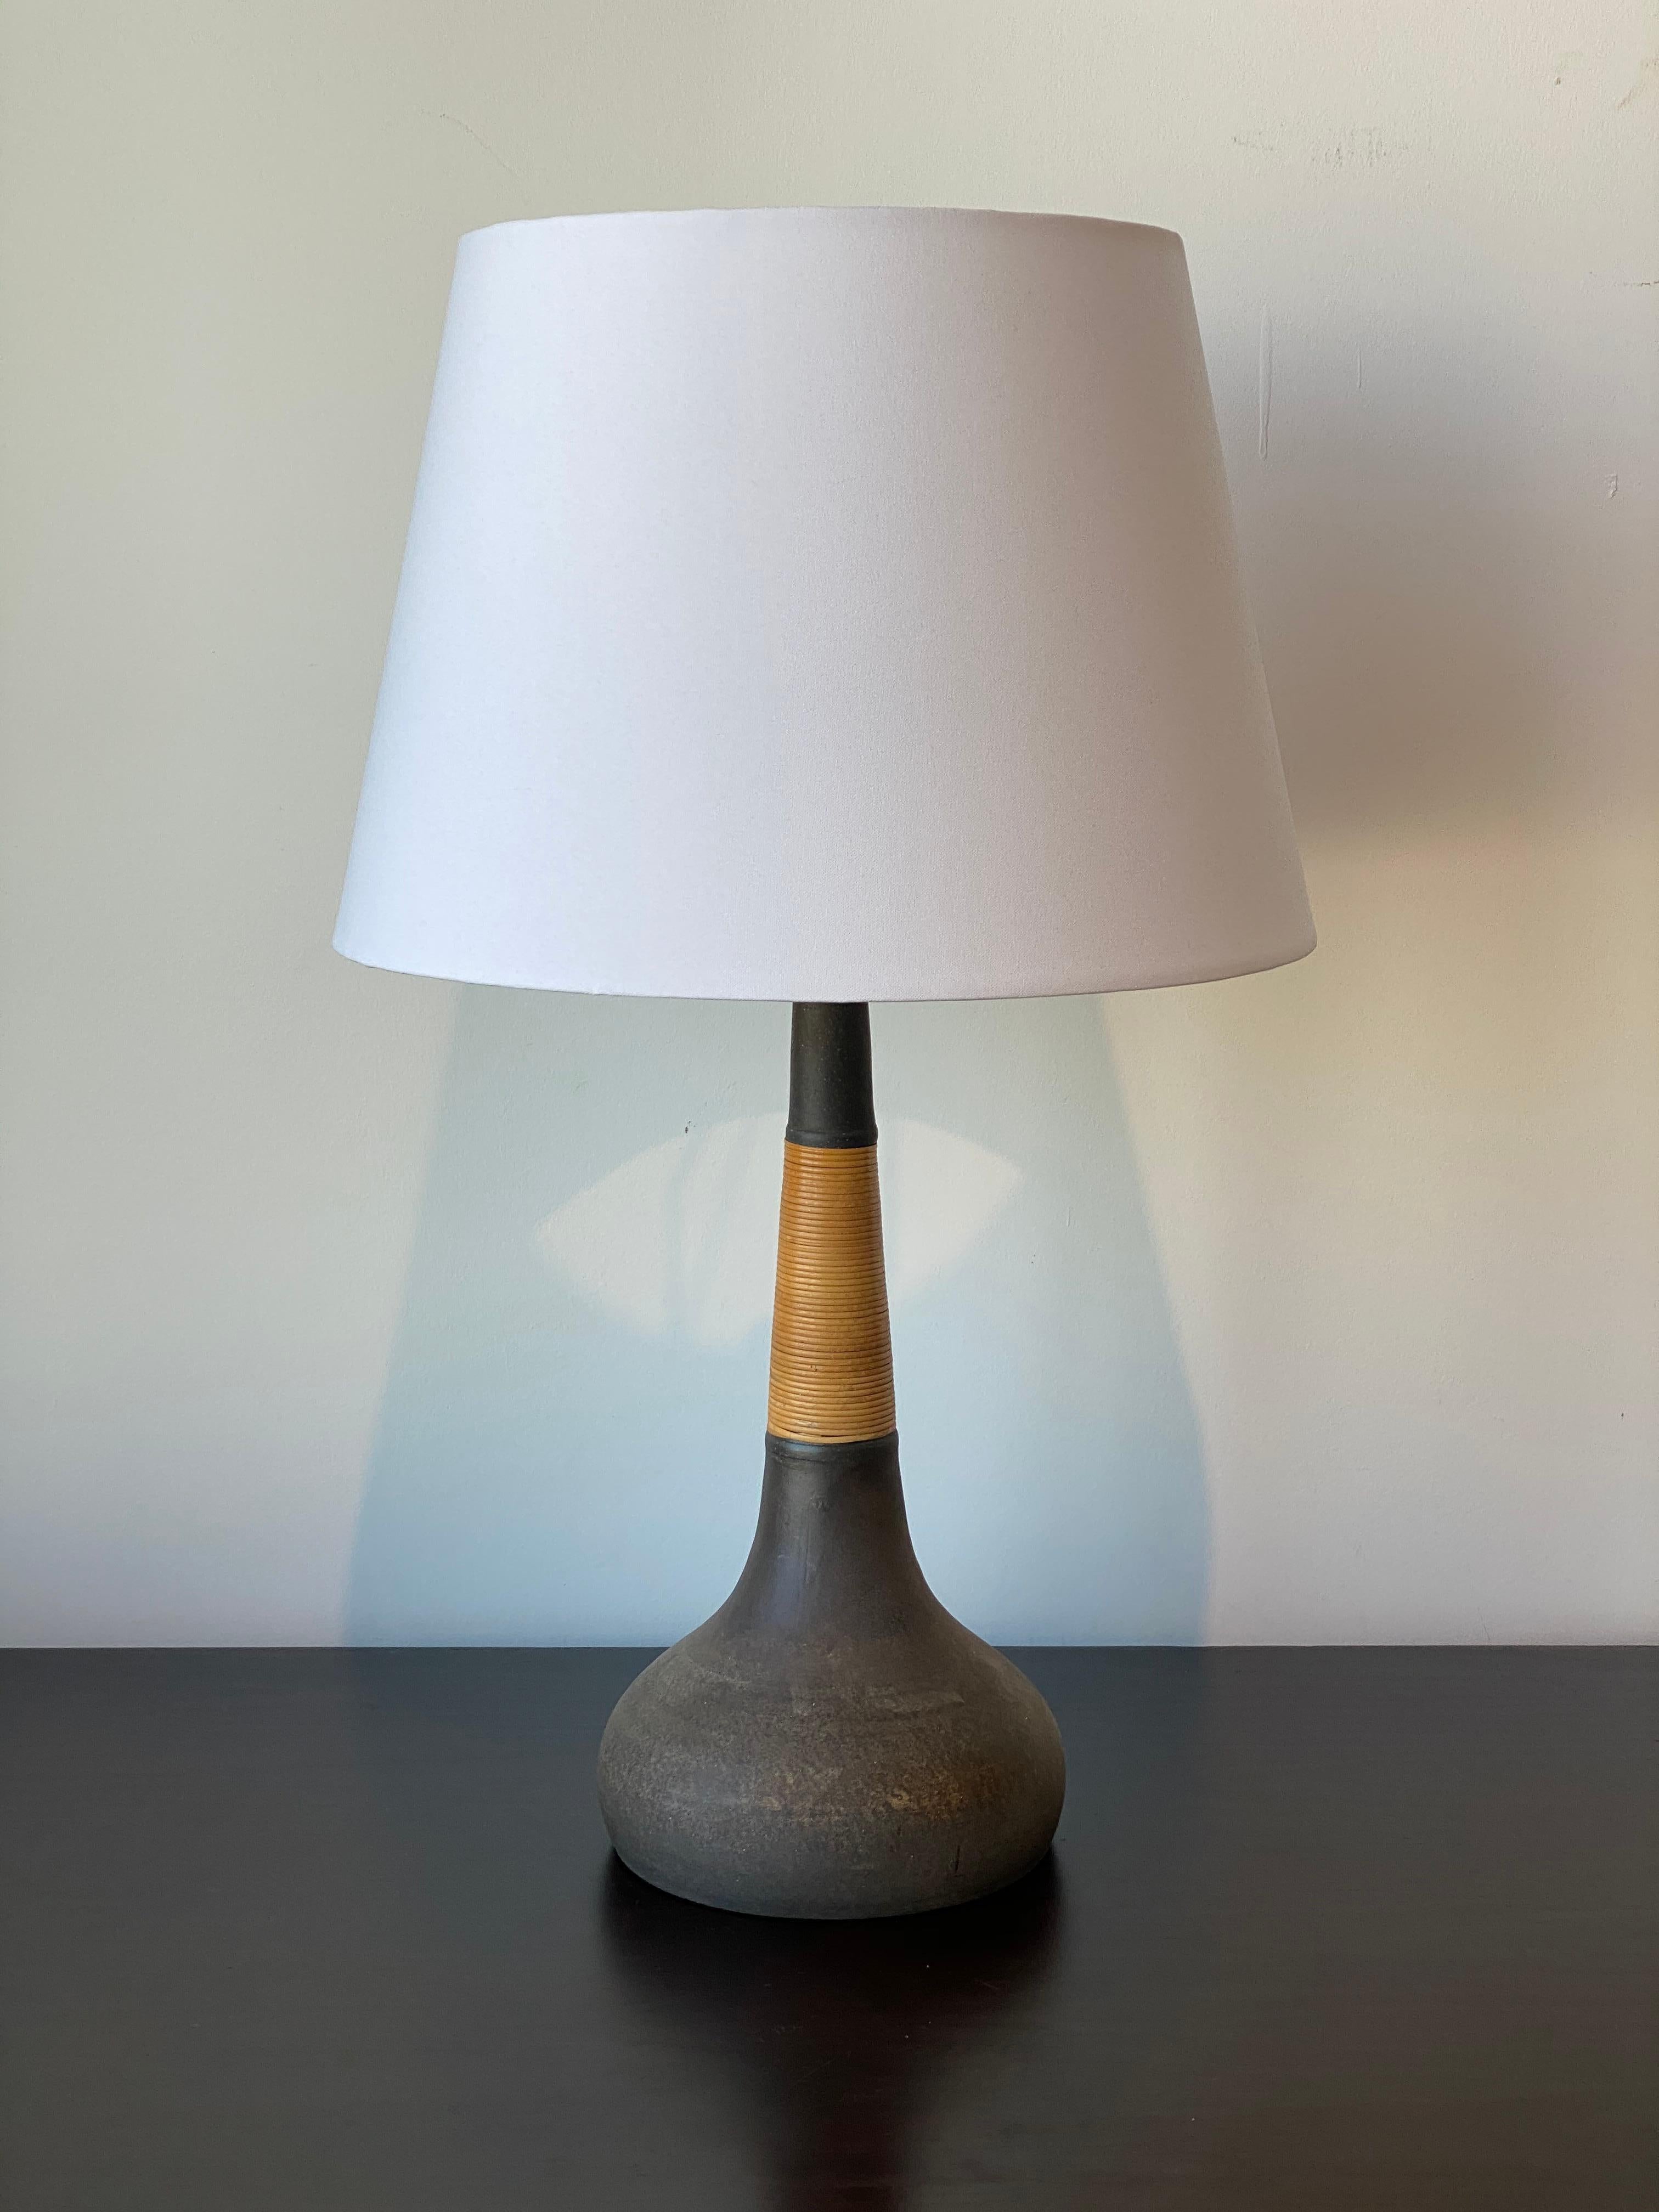 A table lamp designed by Nils Kähler. Produced for Le Klint, Denmark, 1950s. In glazed stoneware and wrapped cane. 

Other designers of the period include Palshus, Axel Salto, Carl-Harry Stålhane, Gunnar Nylund.